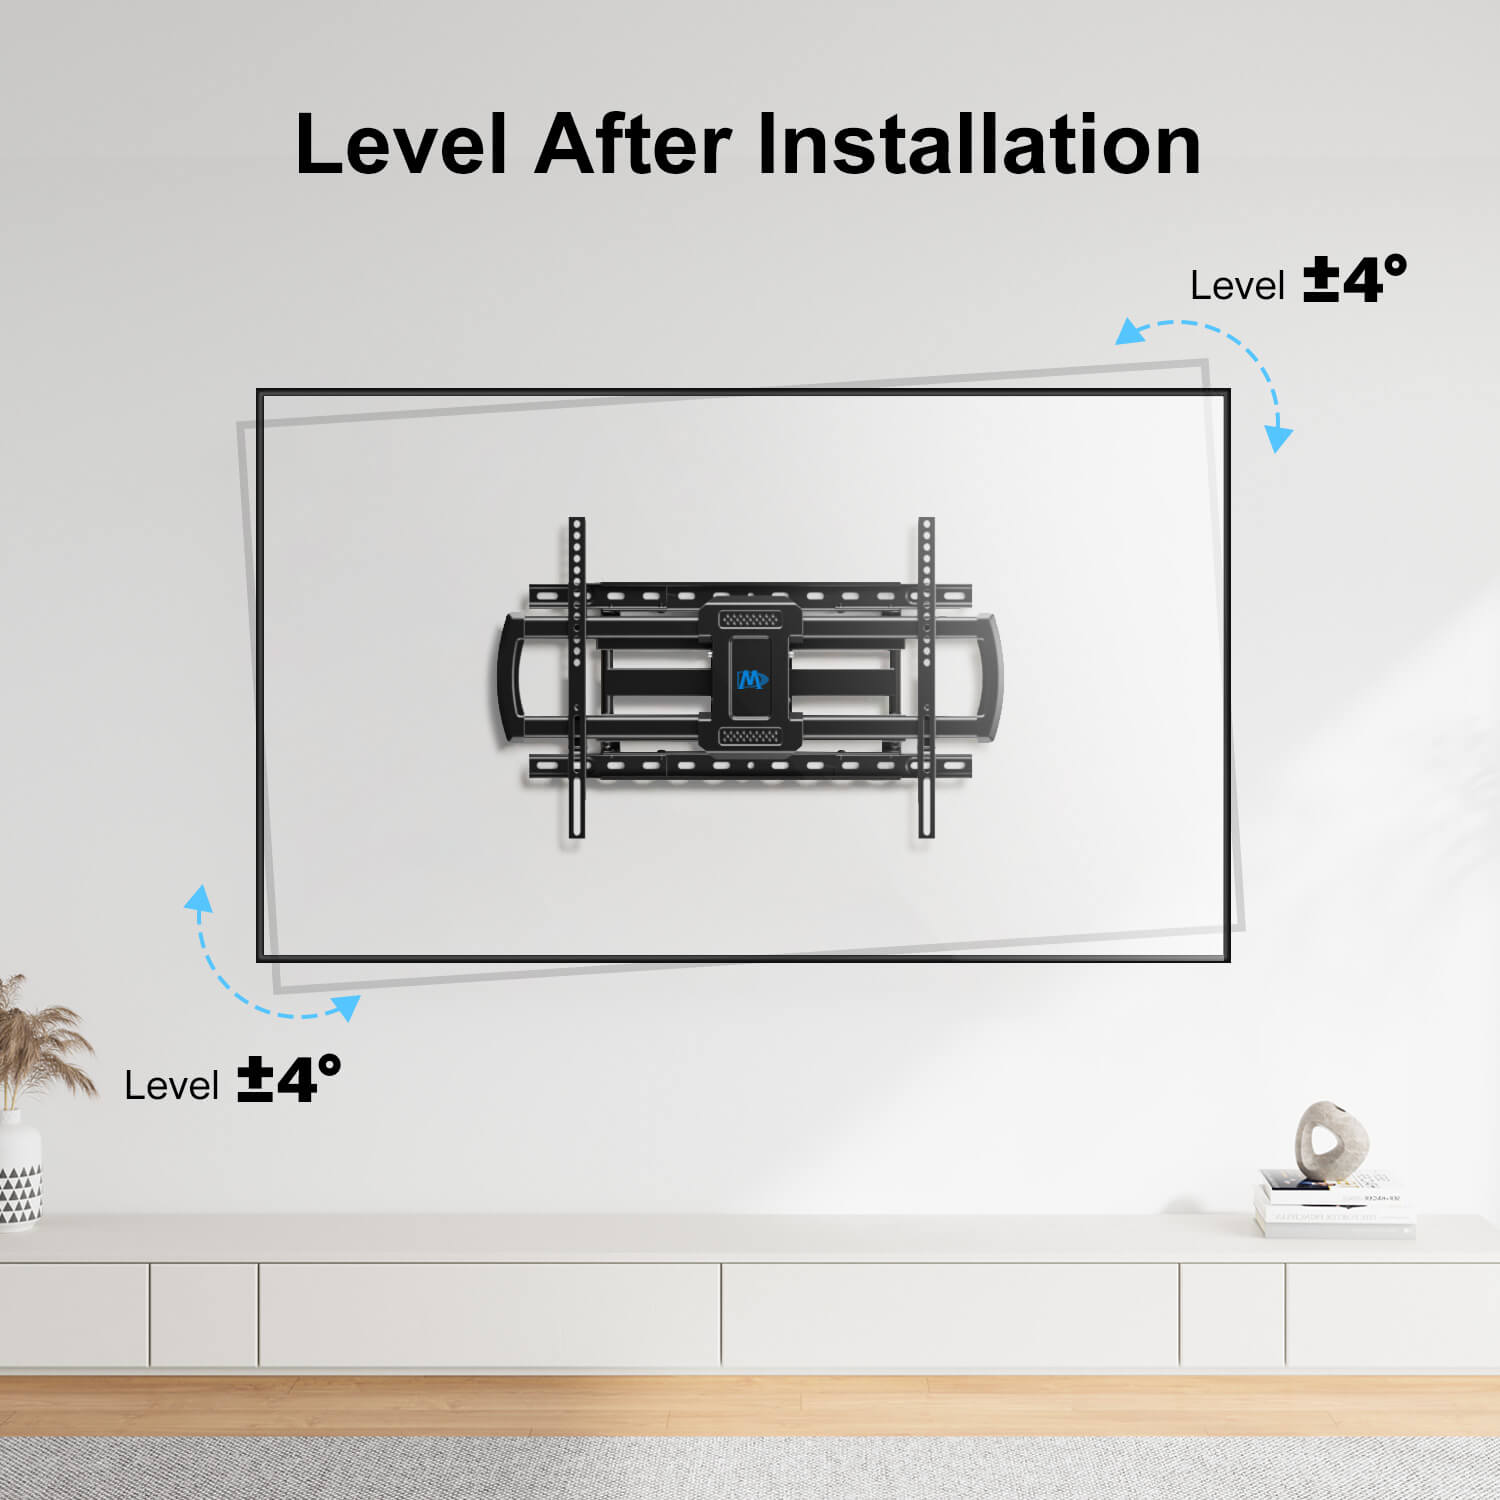 65 inch TV wall mount with easy TV leveling post installation